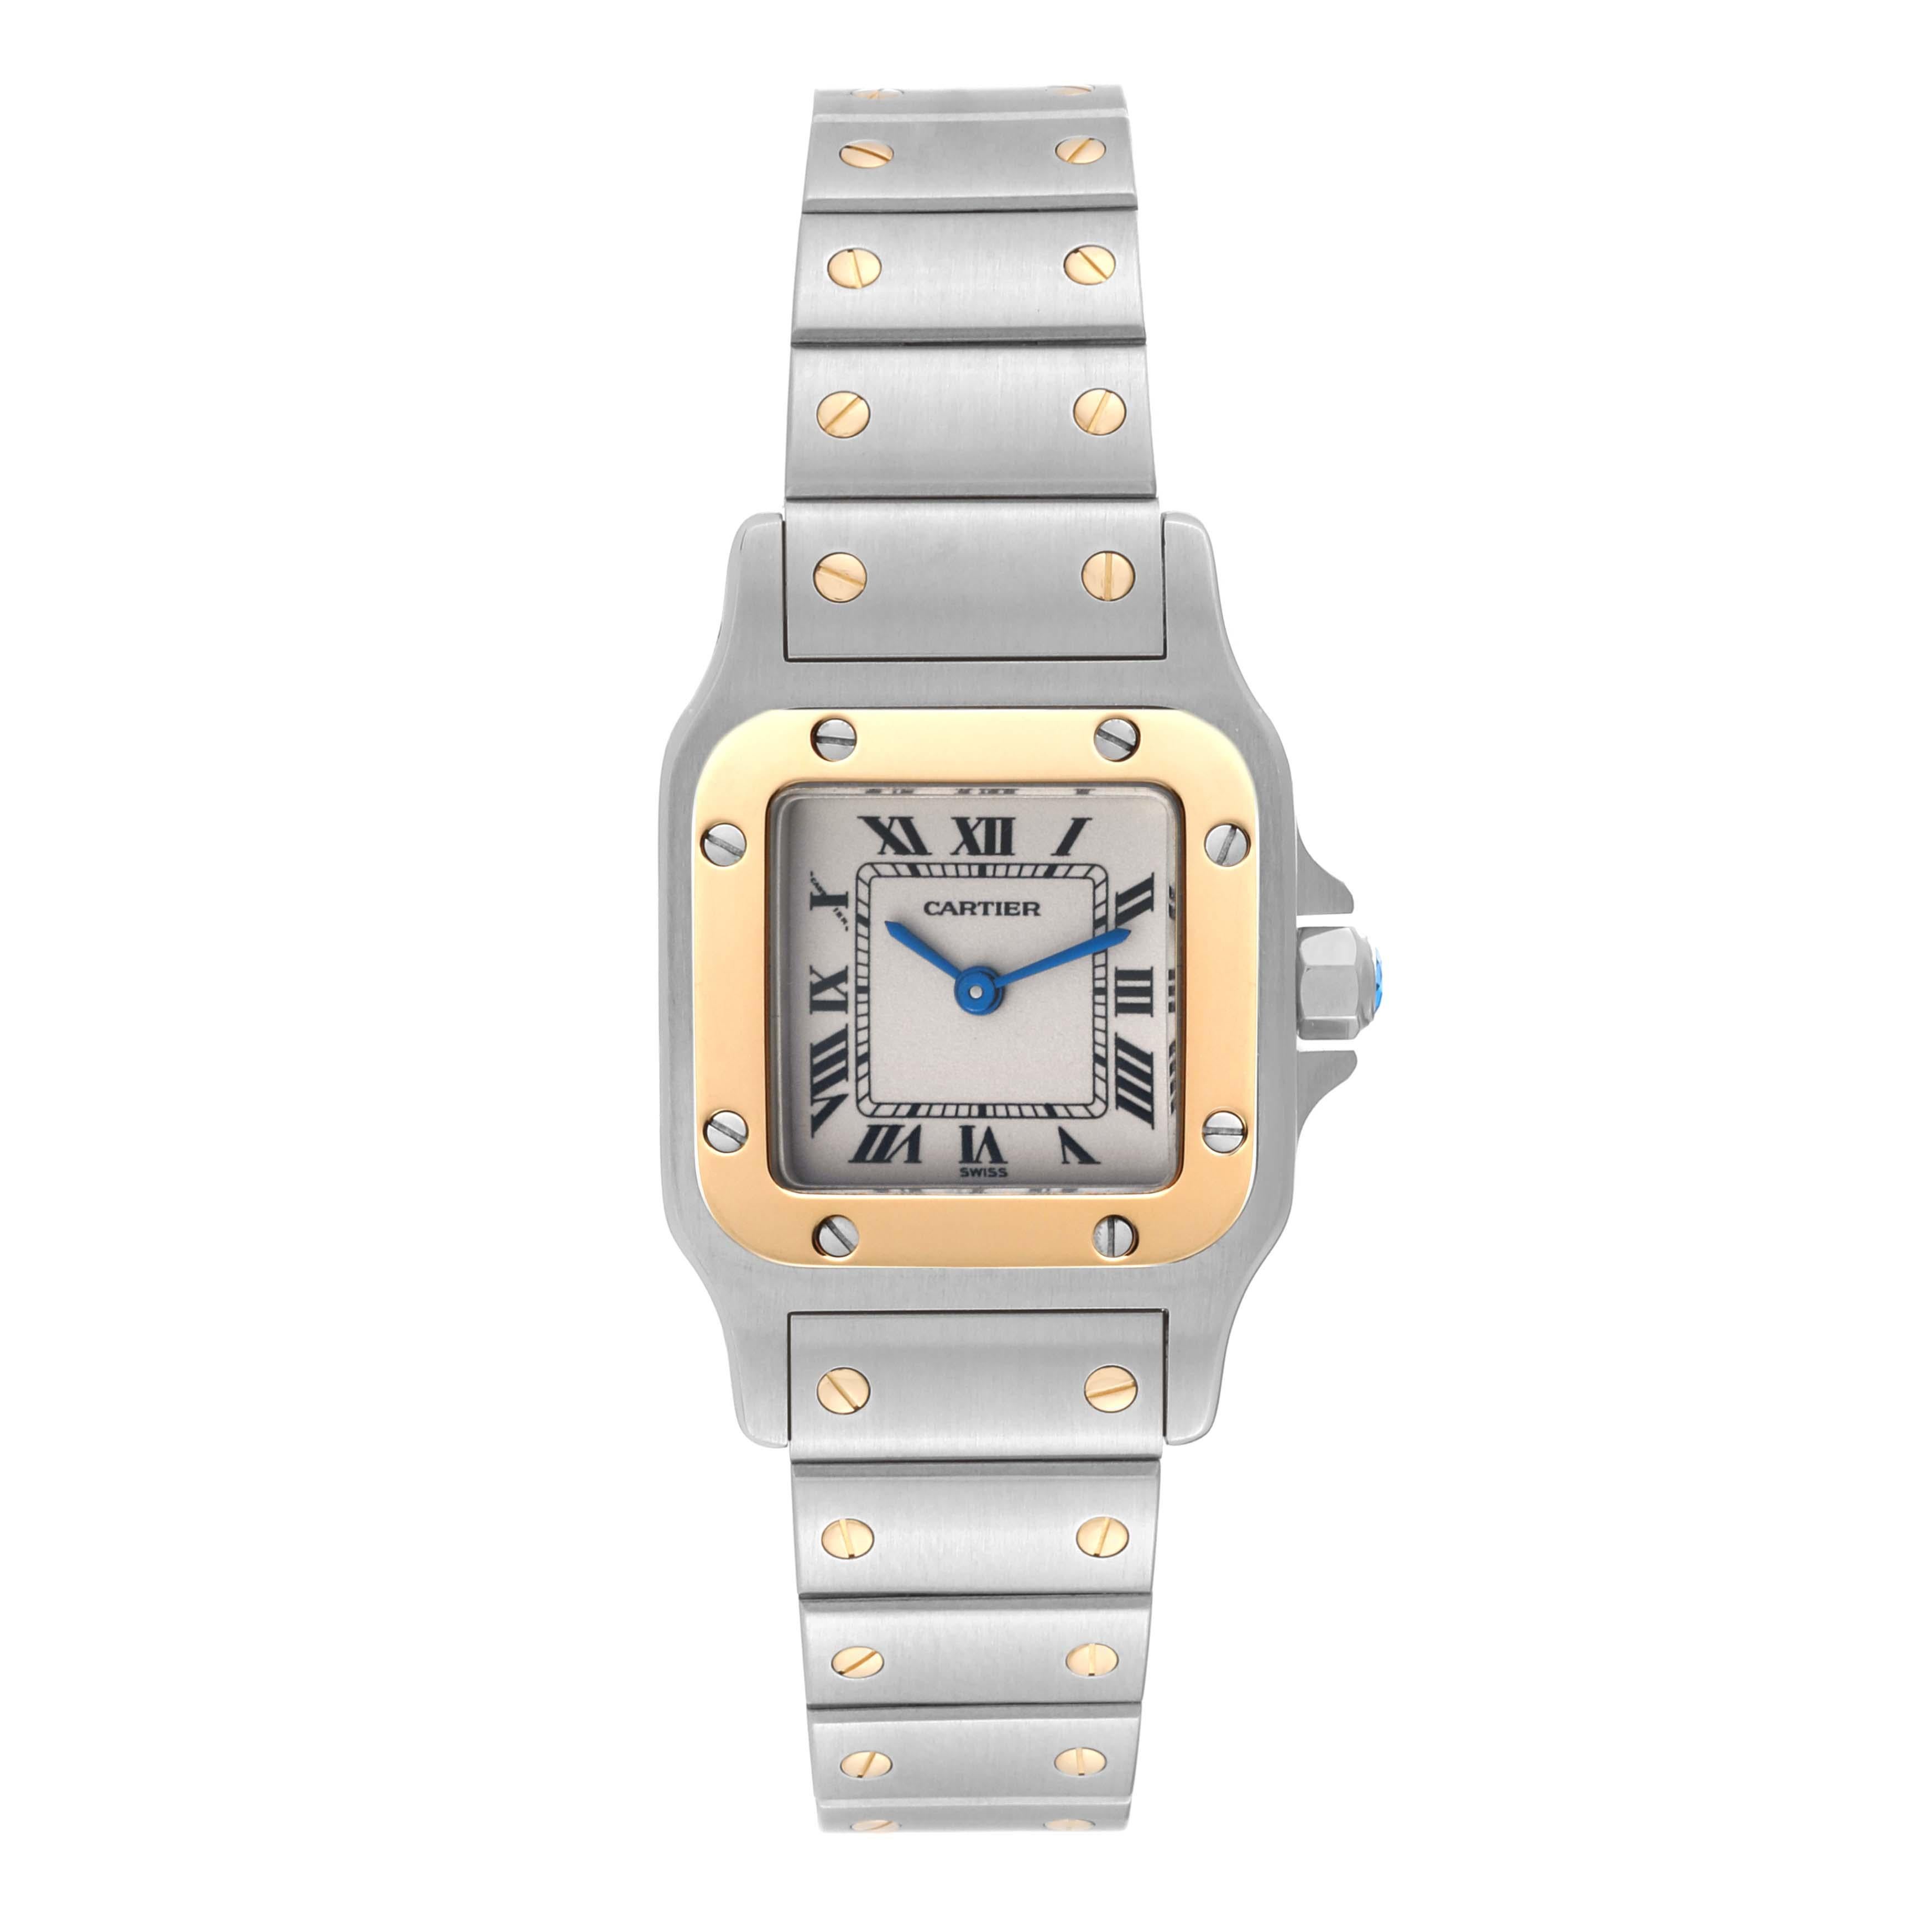 Cartier Santos Galbee Small Steel Yellow Gold Ladies Watch W20012C4. Quartz movement. Stainless steel case 24.0 x 34.7 mm. Steel octagonal crown set with a faceted blue spinel. 18K yellow gold bezel punctuated with 8 signature screws. Scratch